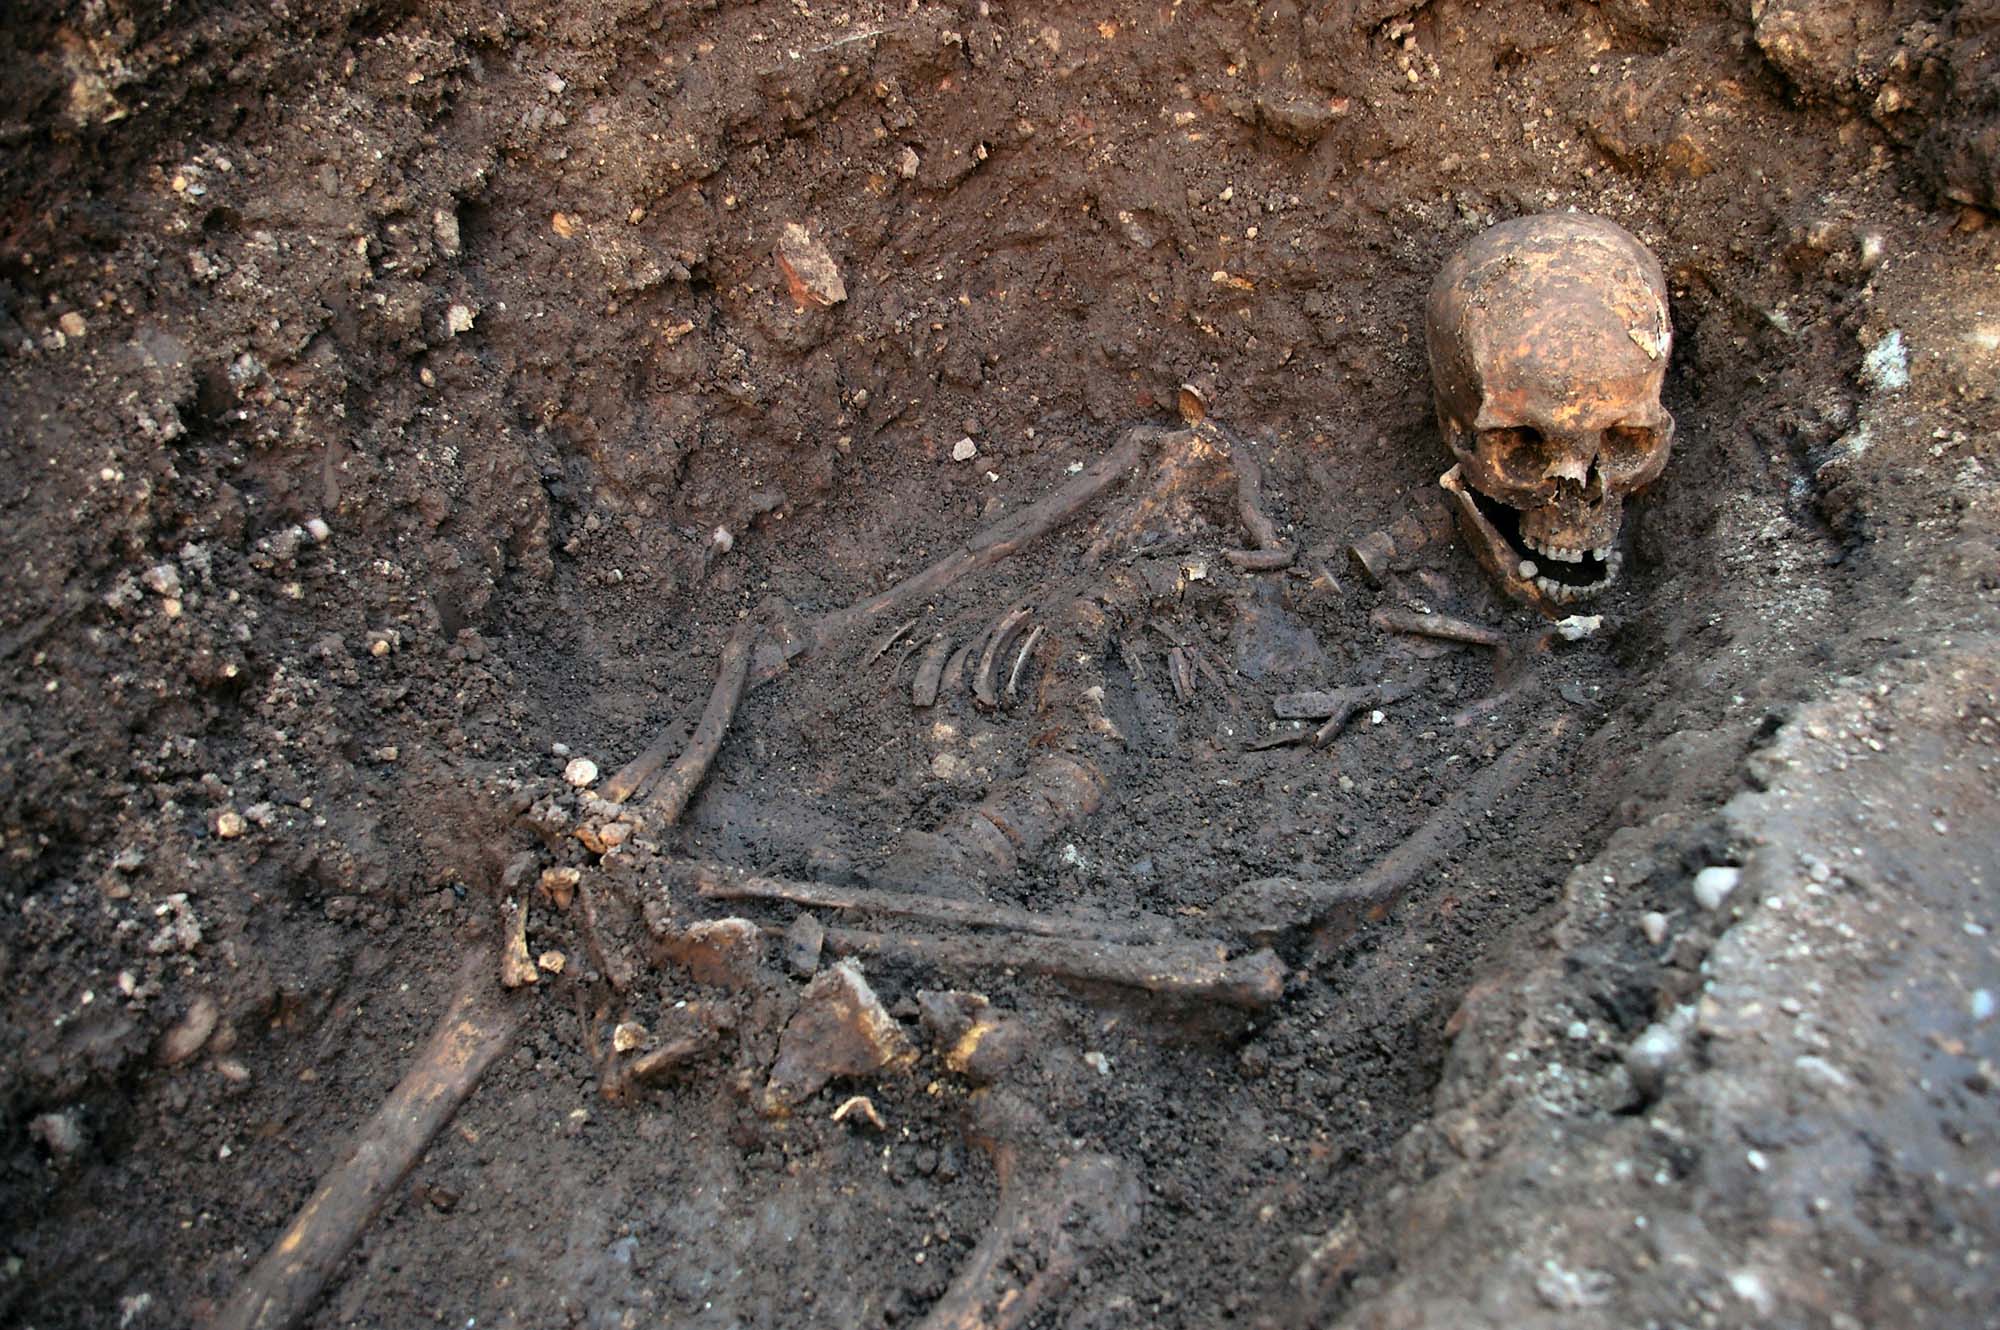 Richard III's remains in situ in his grave shortly after their discovery in 2012 - University of Leicester